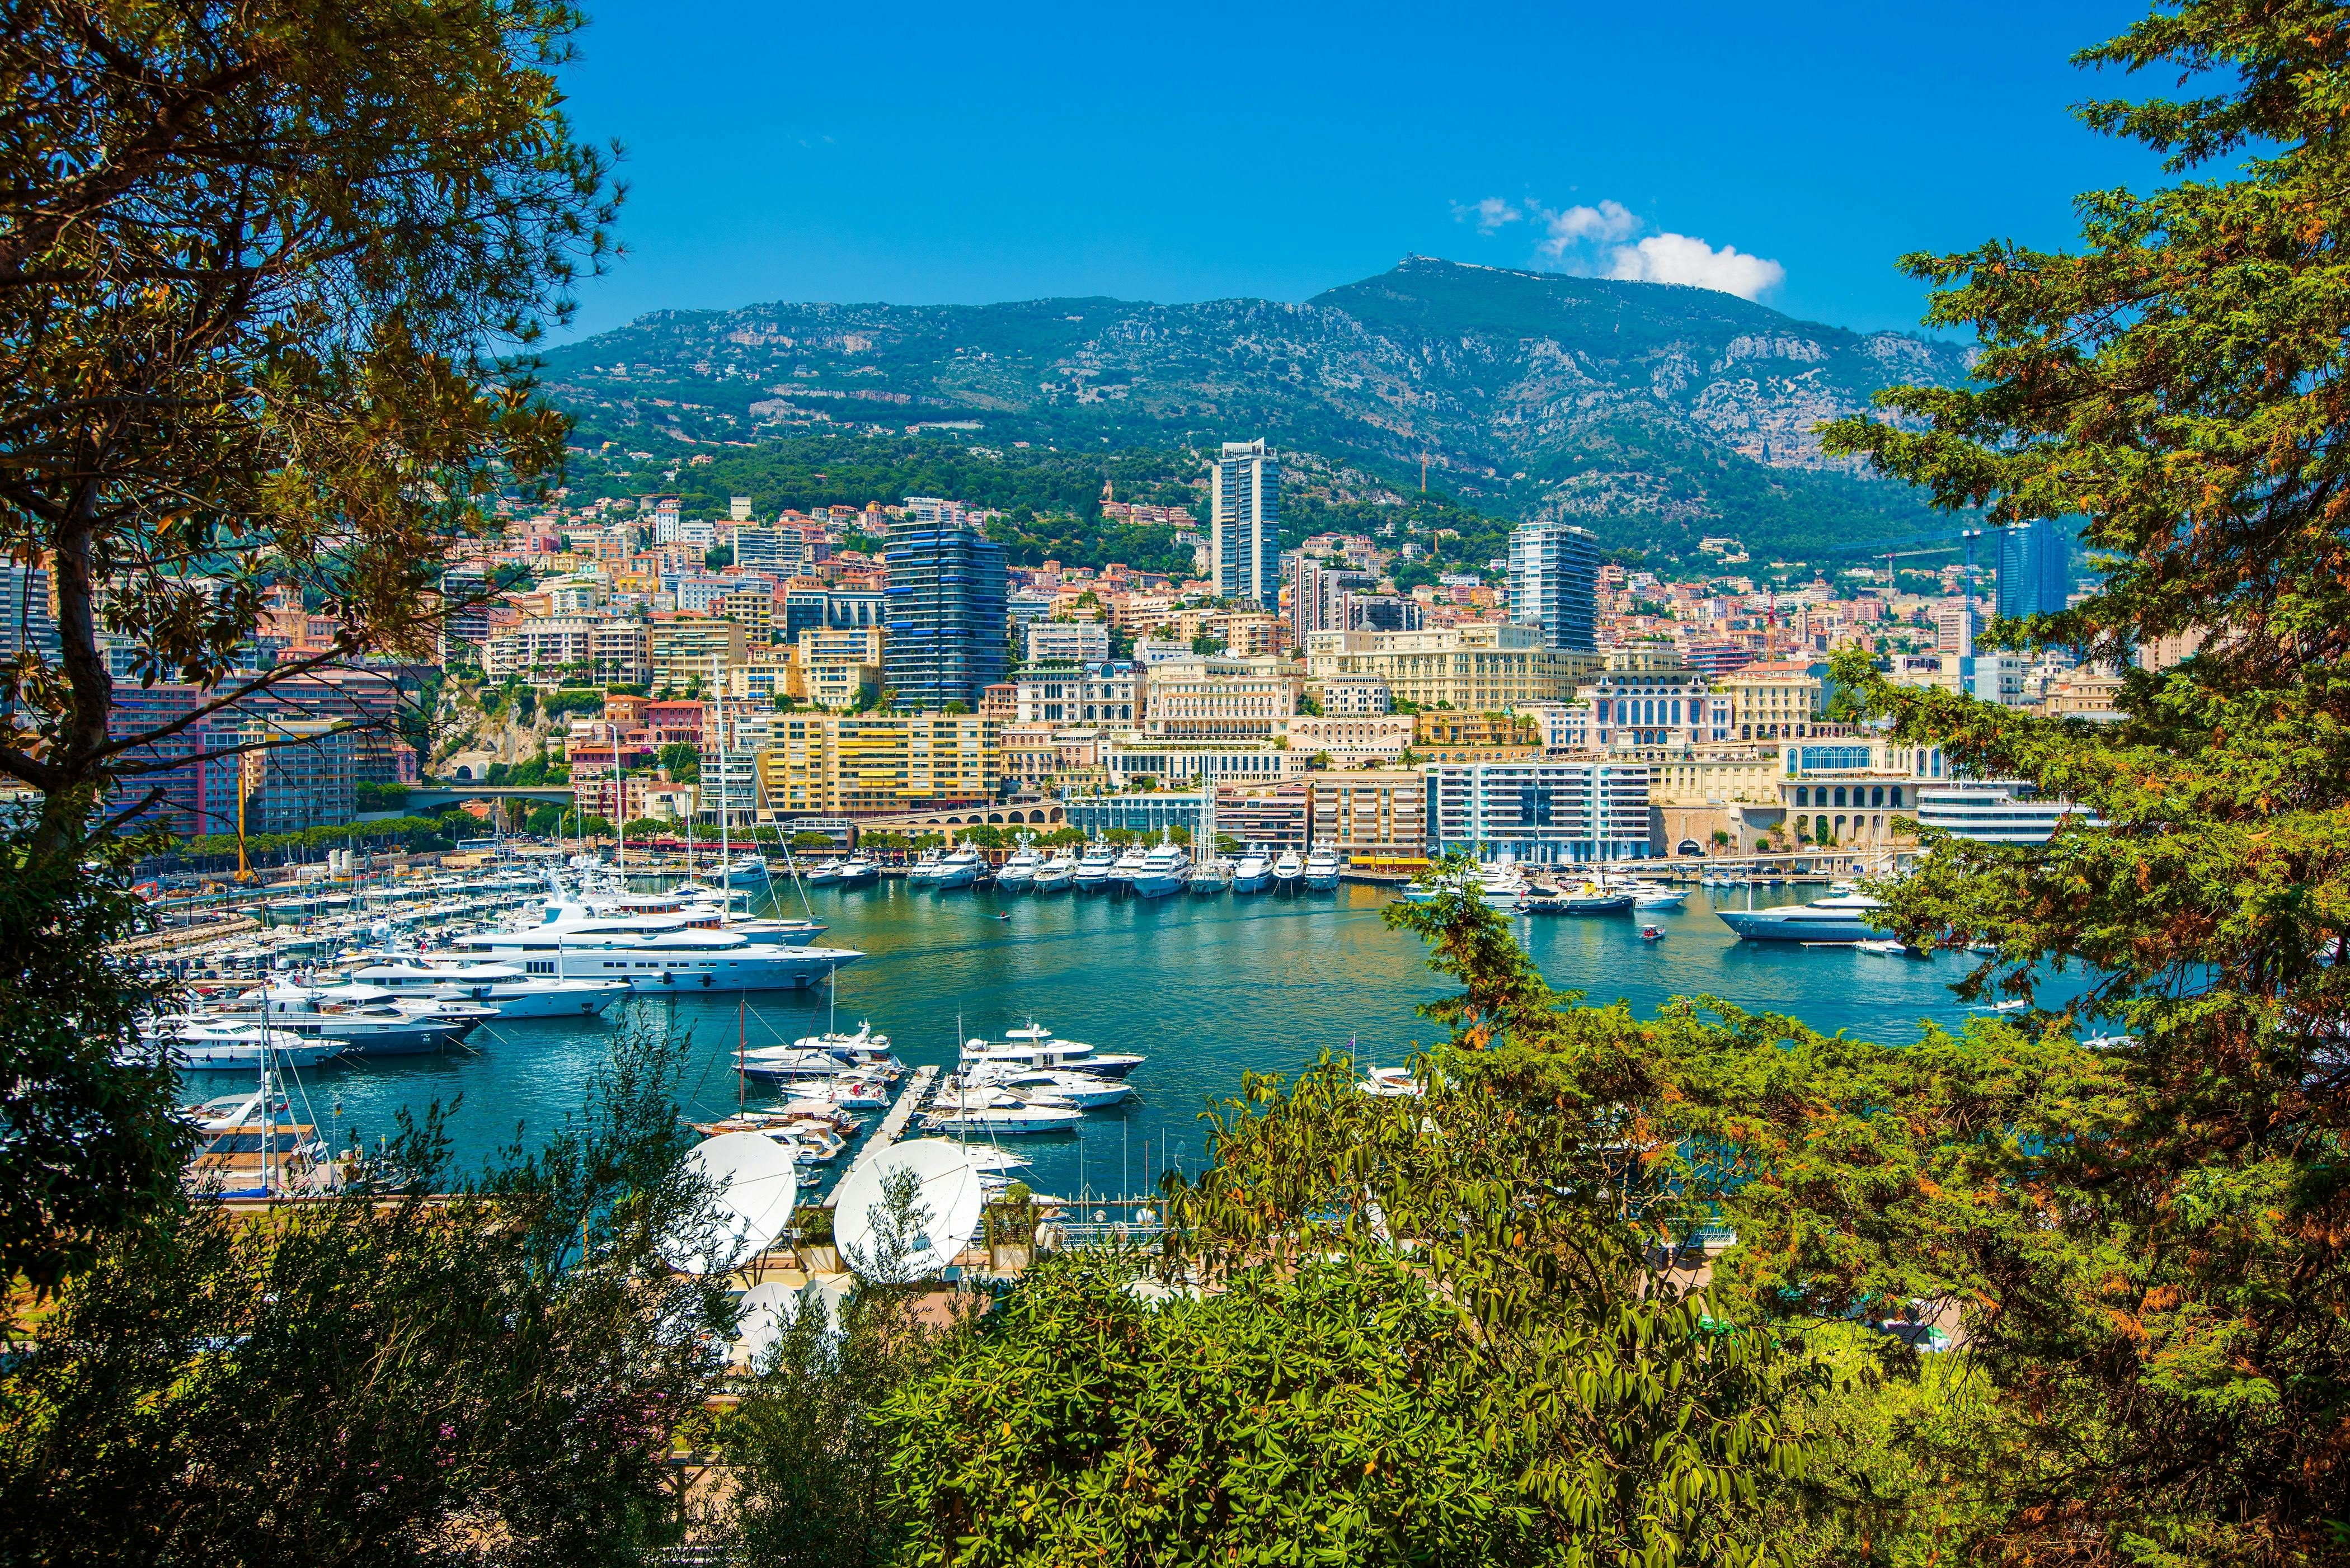 Eze, Monaco and Monte Carlo half-day group tour from Nice